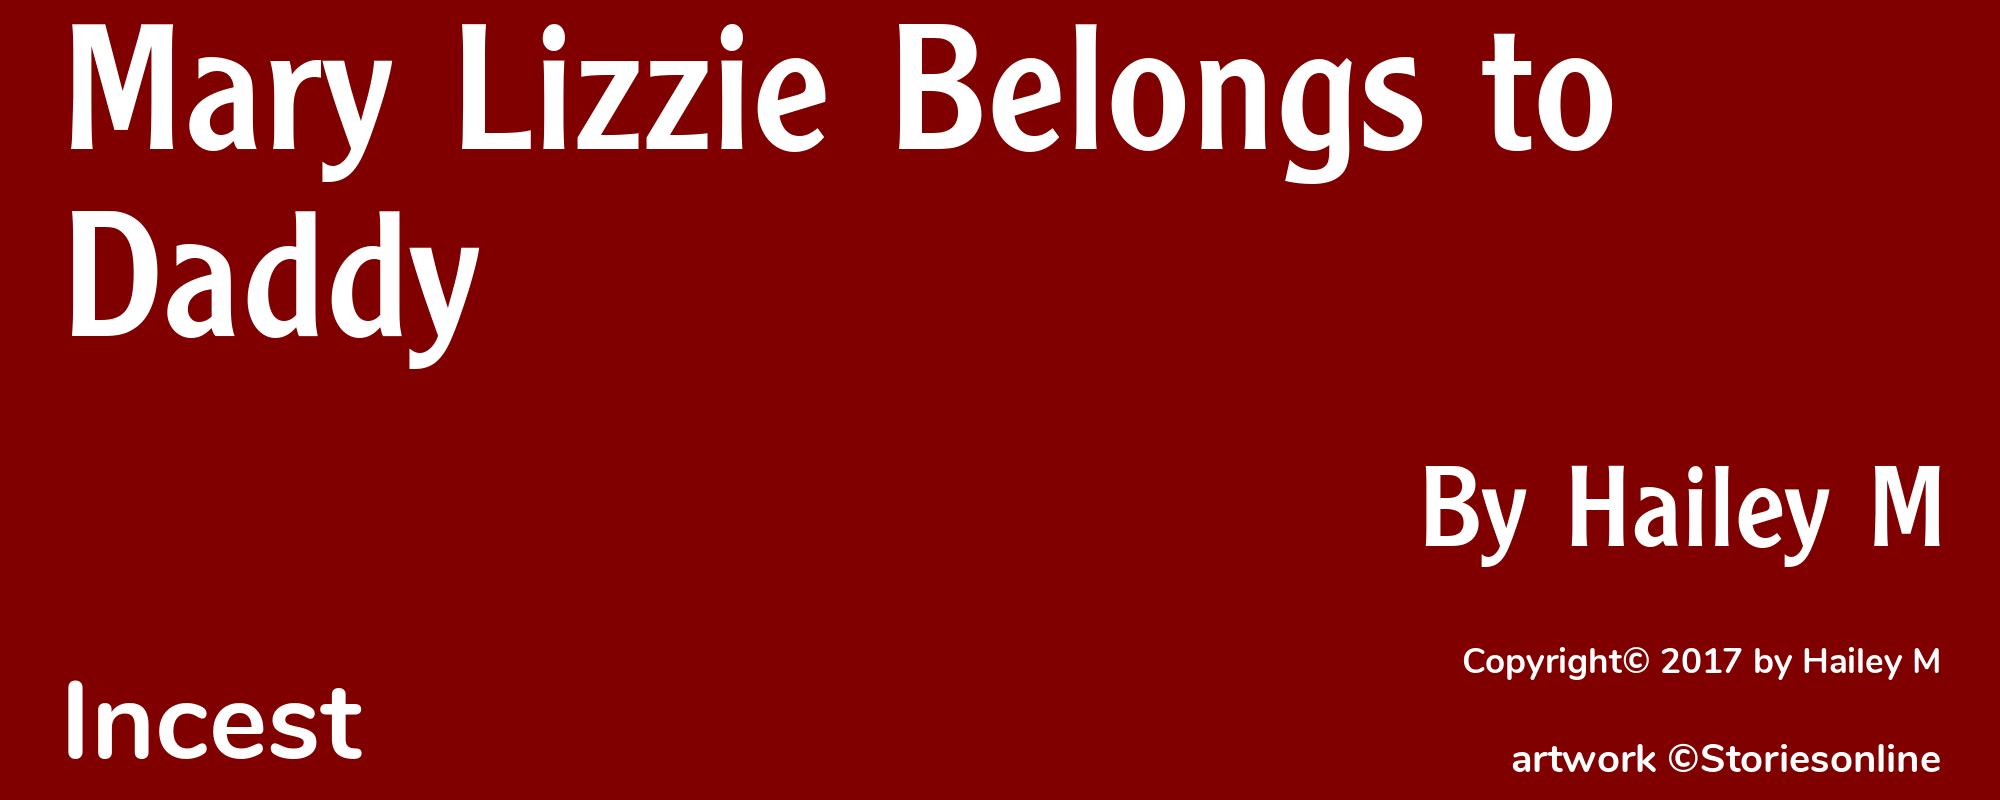 Mary Lizzie Belongs to Daddy - Cover